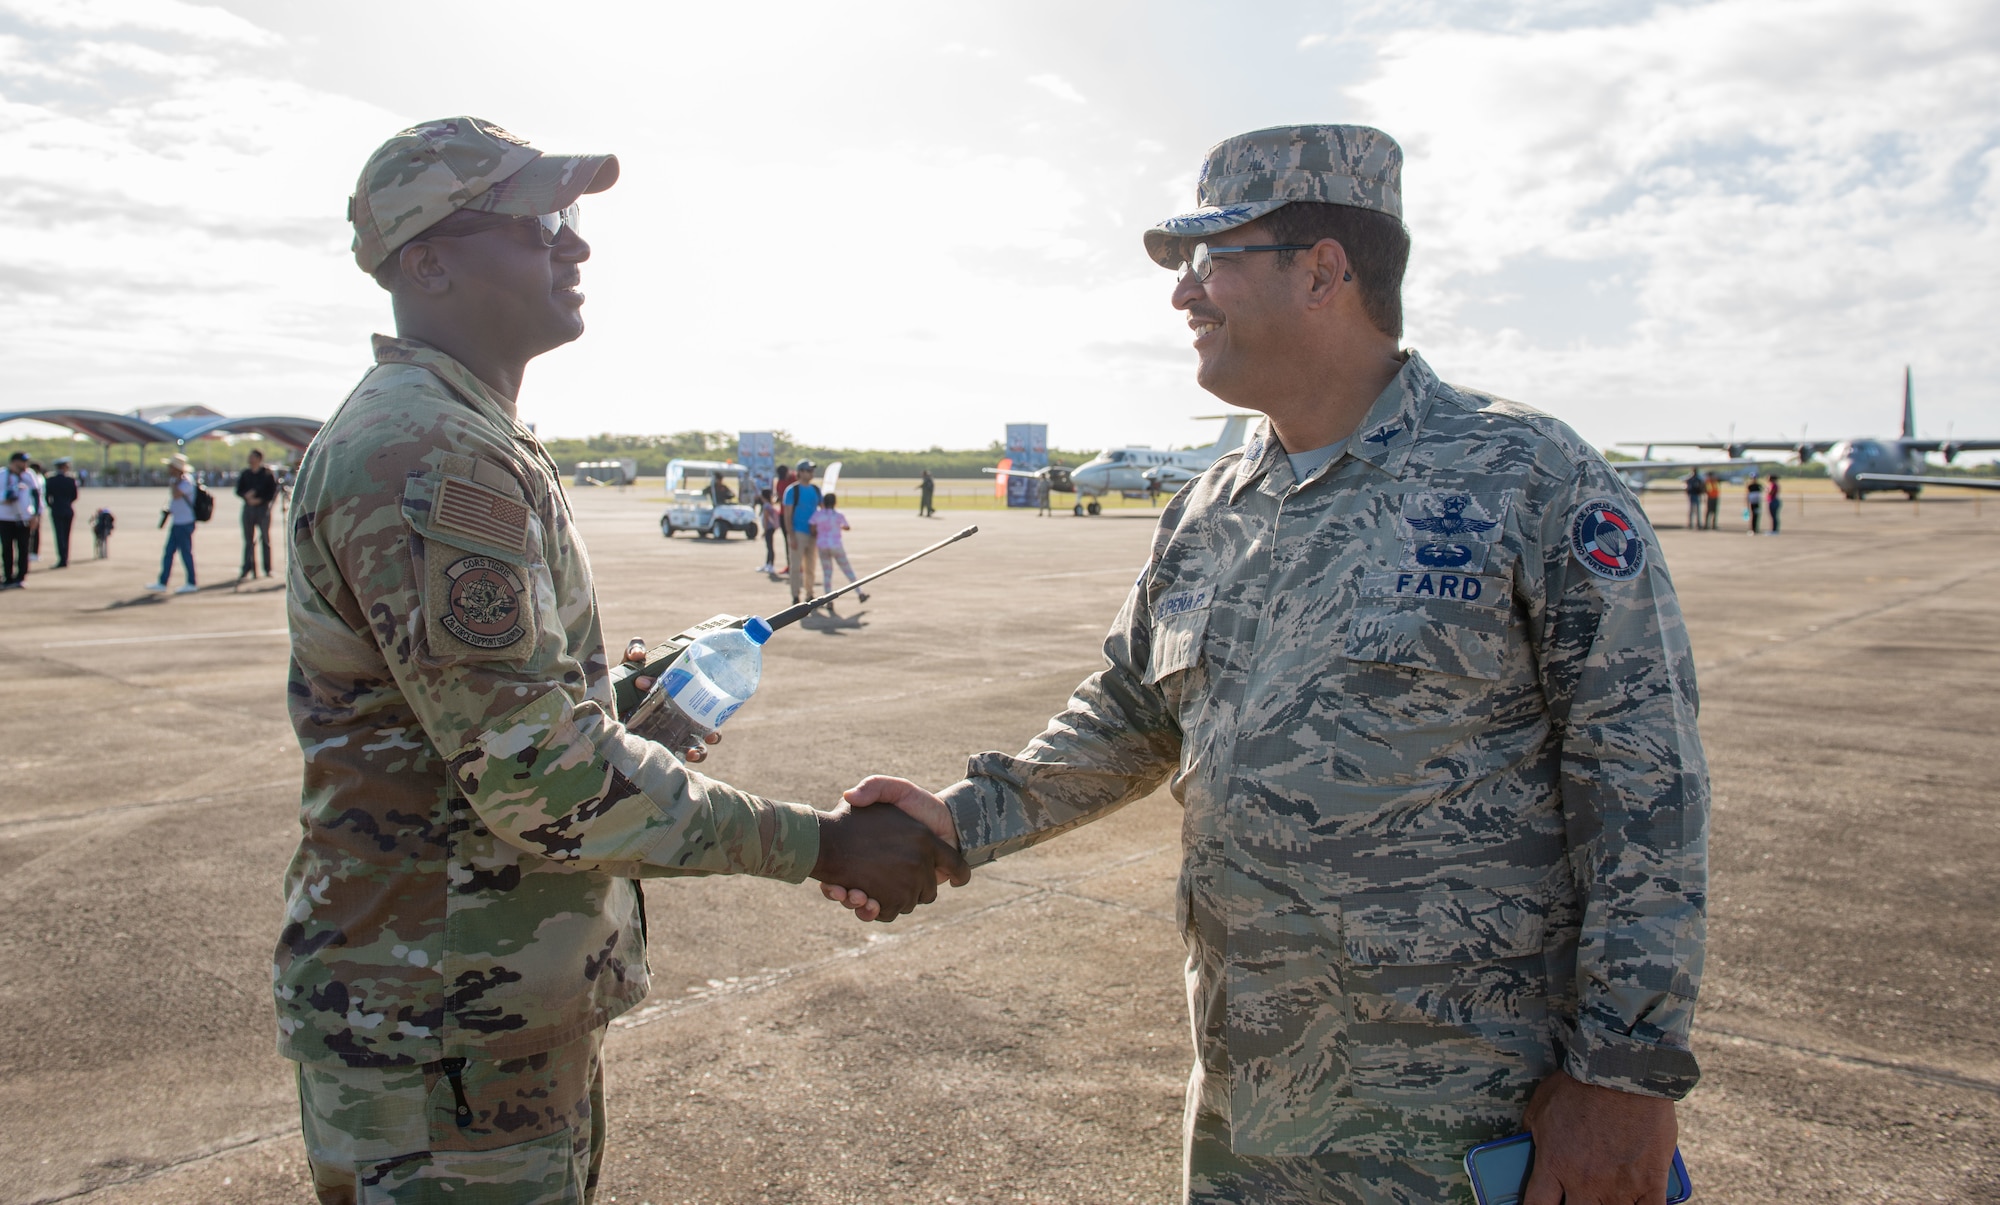 Col. Victor De Peña Paradas, San Isidro Base commander, shakes hands with Maj. Lawrence Thomas, 23rd Air Base Squadron deputy, during an airshow at San Isidro Air Base, Dominican Republic, Feb. 19, 2023.The airshow was dedicated to the FARD's 75th anniversary where both U.S. and Dominican Republic aircraft demonstrated capabilities and strengthened their bond as partner nations. (U.S. Air Force photo by Tech. Sgt. Jessica H. Smith-McMahan)